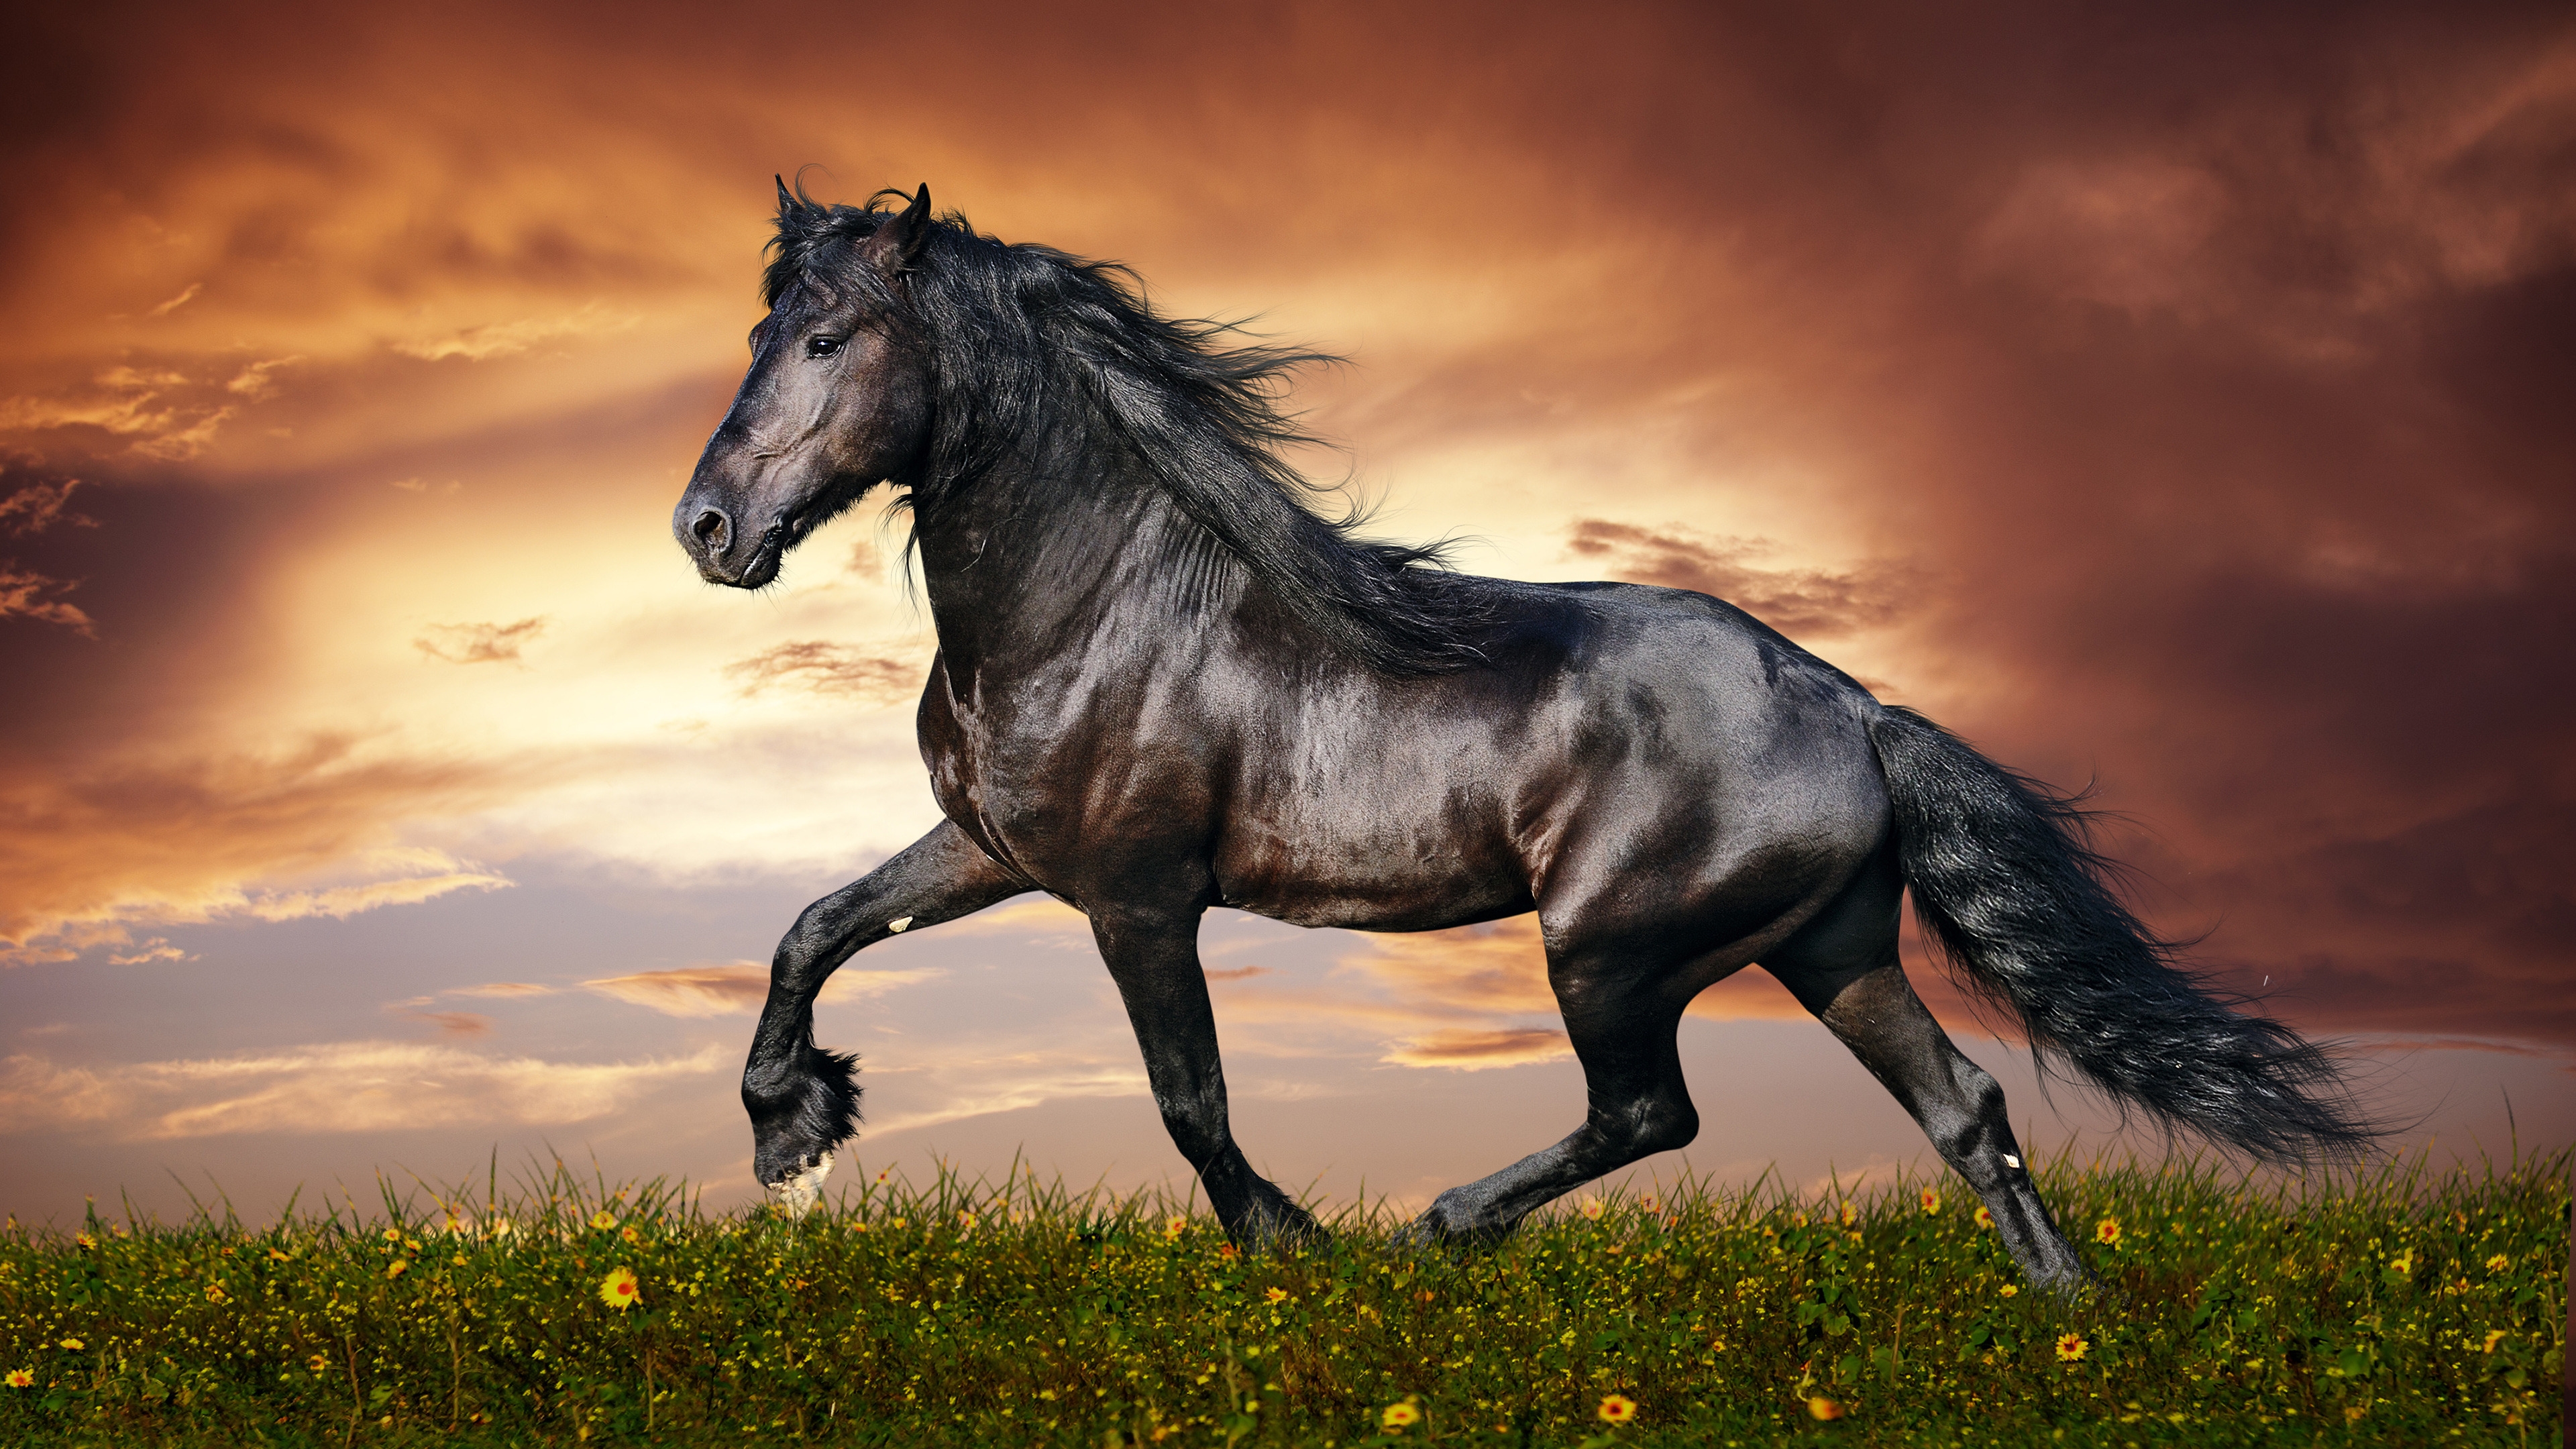 Beautiful Black Horse for 3840 x 2160 Ultra HD resolution